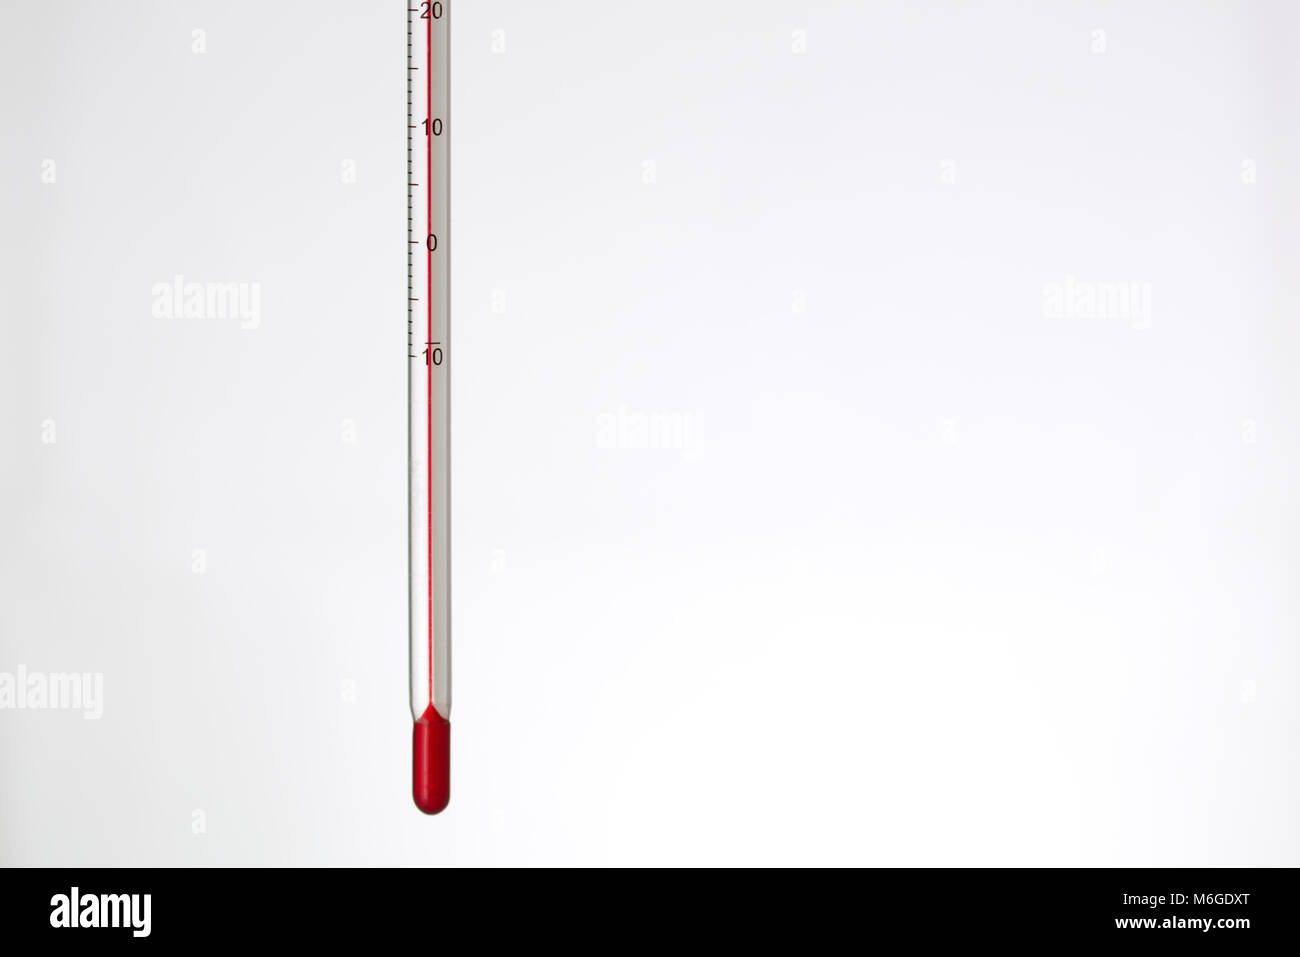 red thermometer isolated on a white background. Scientific medical measuring device Stock Photo